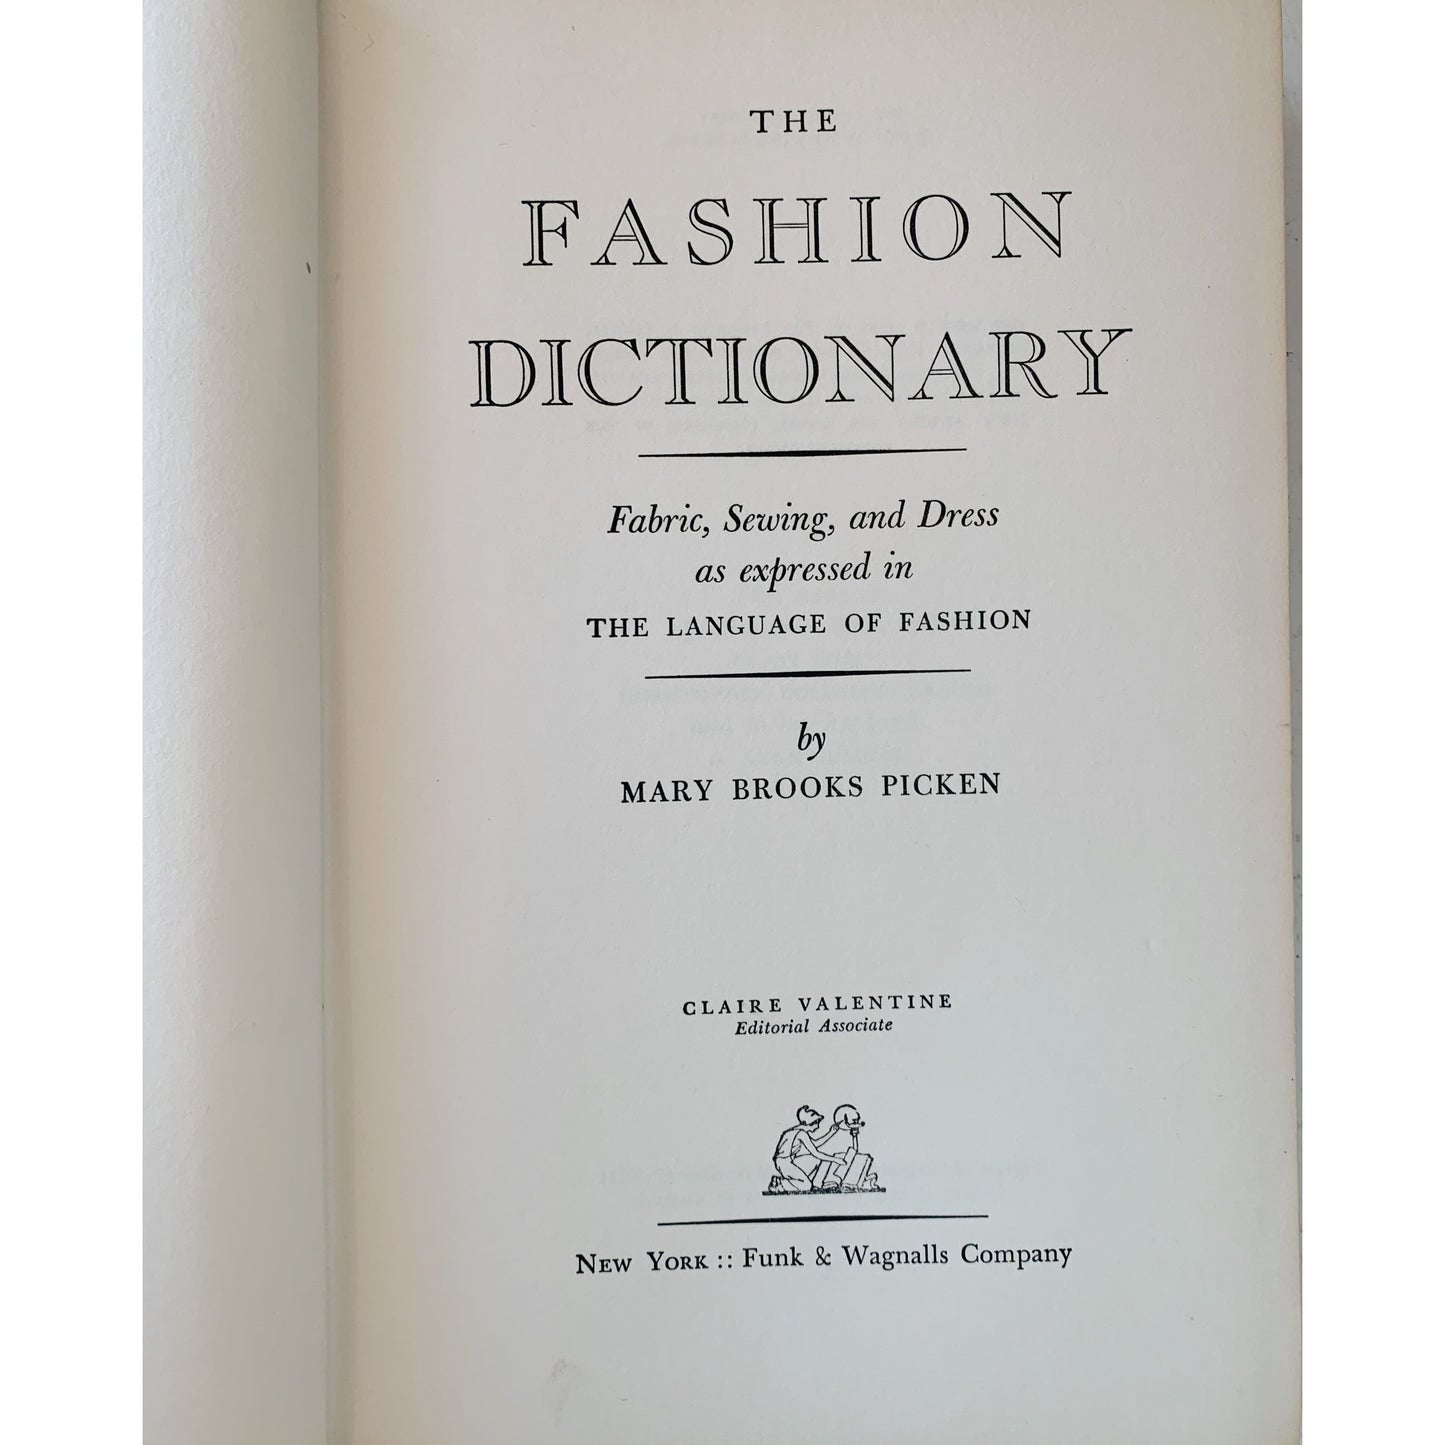 The Fashion Dictionary, Illustrated 1957 Hardcover, The Language of Fashion, Picken